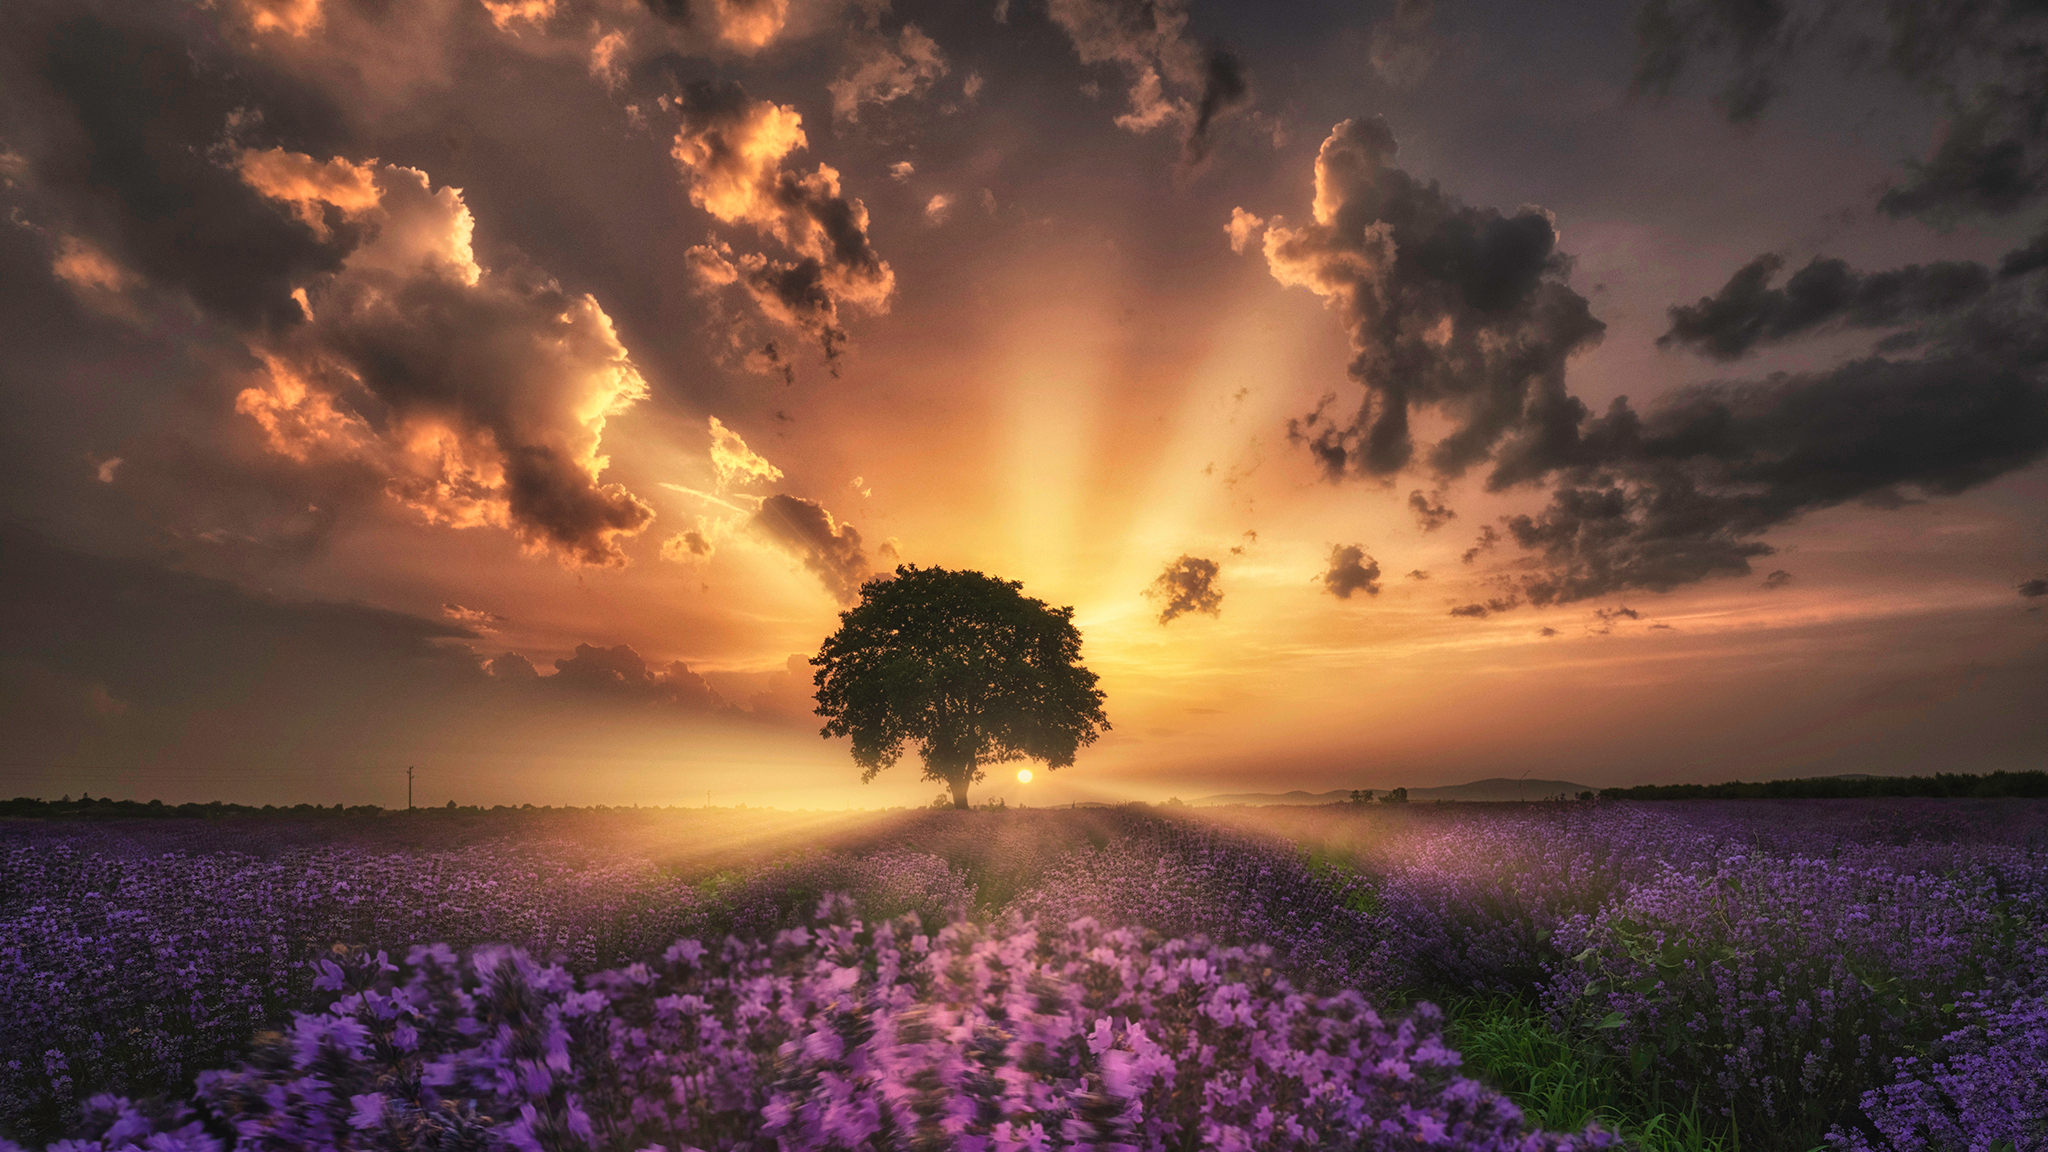 General 2048x1152 trees flowers plants nature sunset clouds landscape photography outdoors